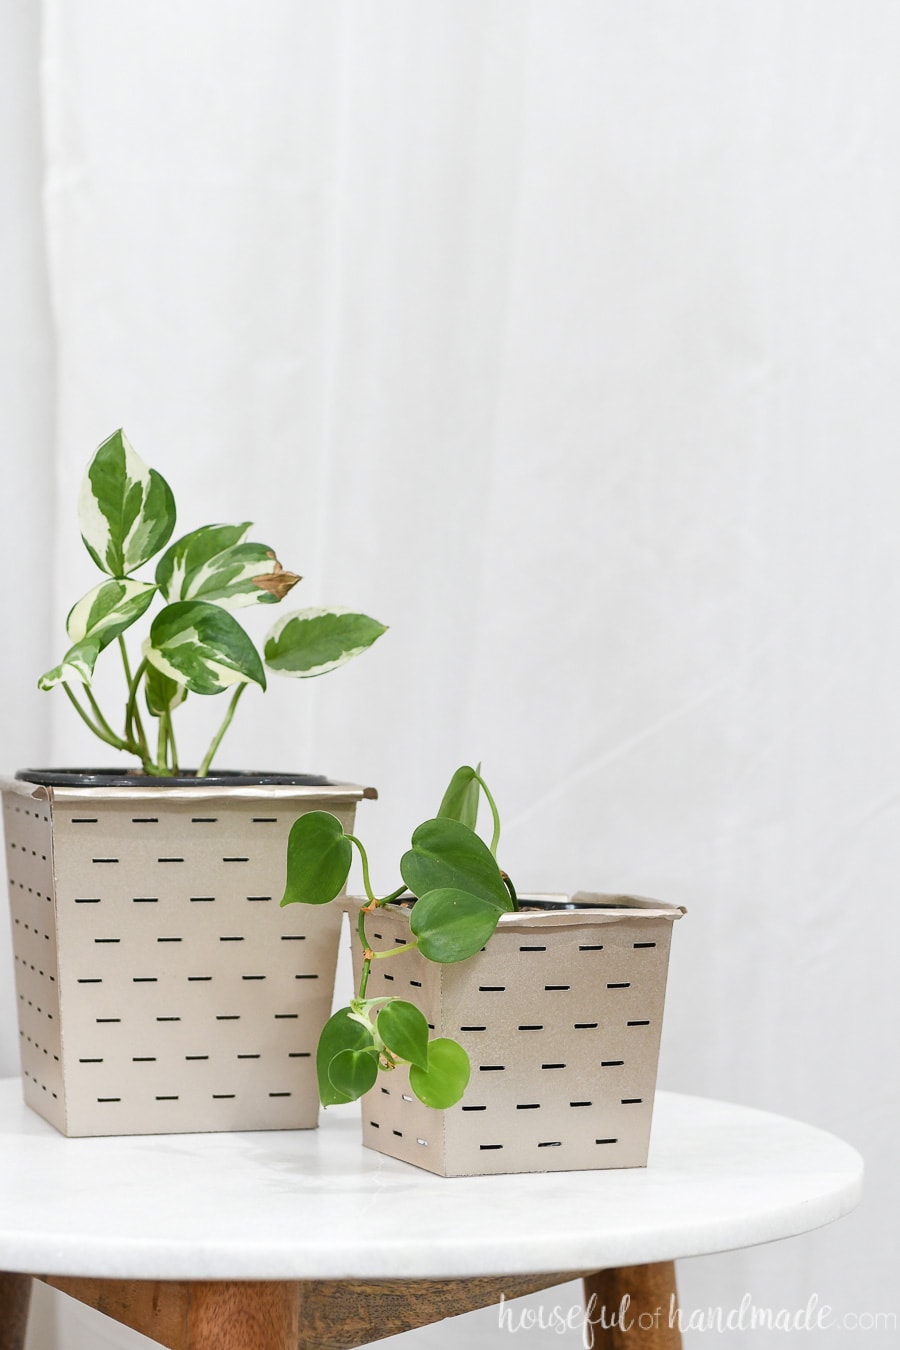 Two spray painted paper buckets holding house plants.